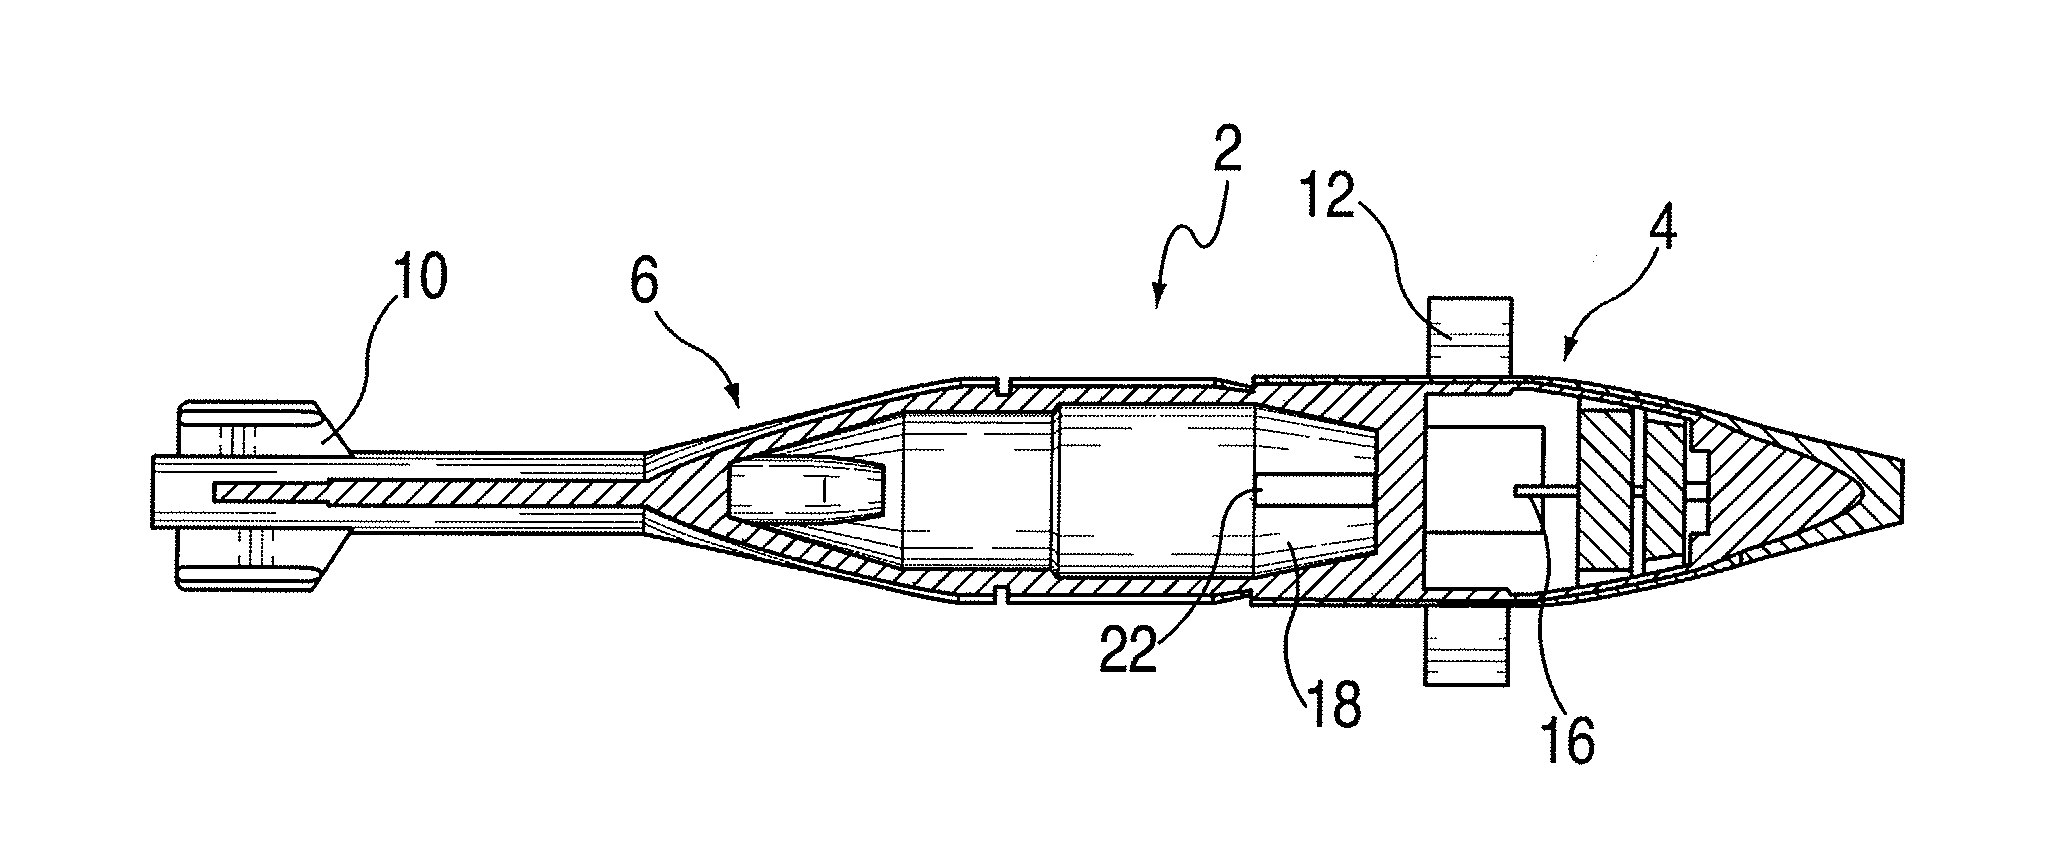 Rolling projectile with extending and retracting canards